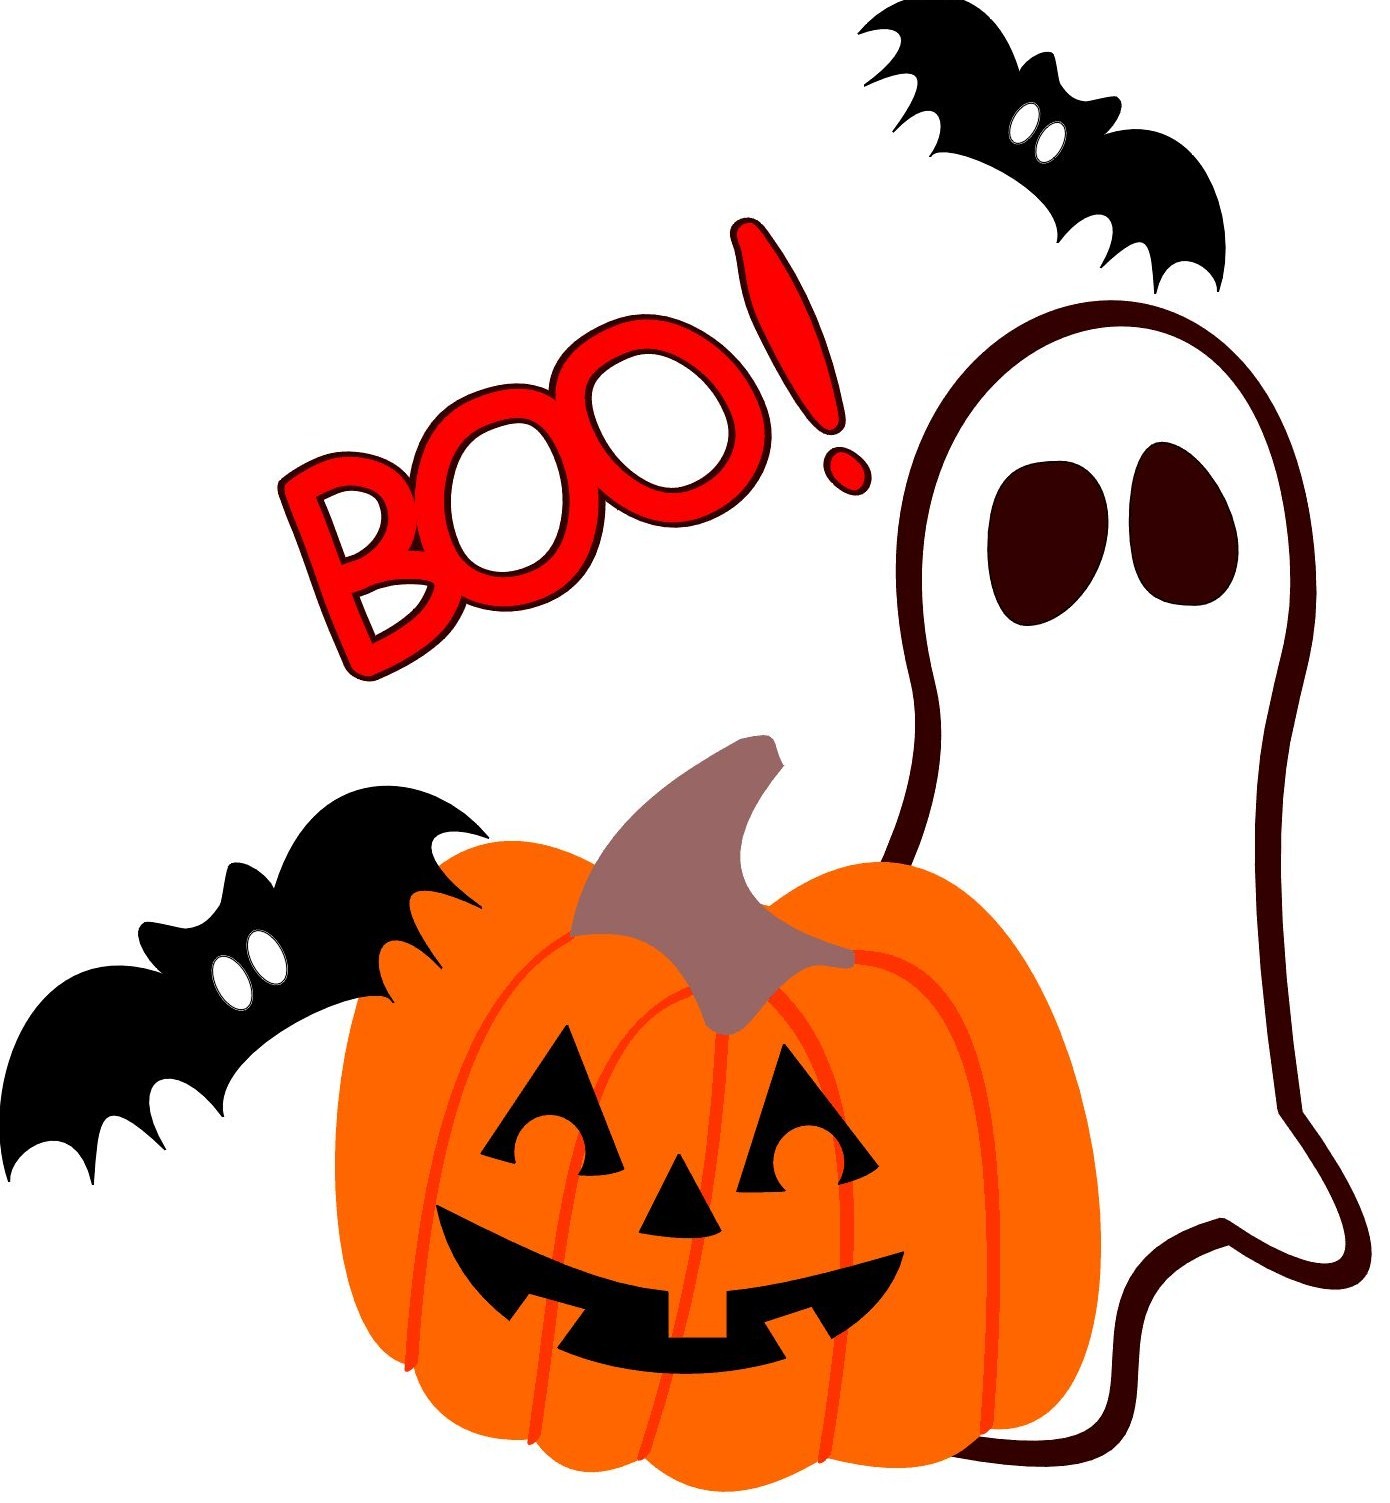 Free halloween halloween clipart free clipart images 2 - Clipartix